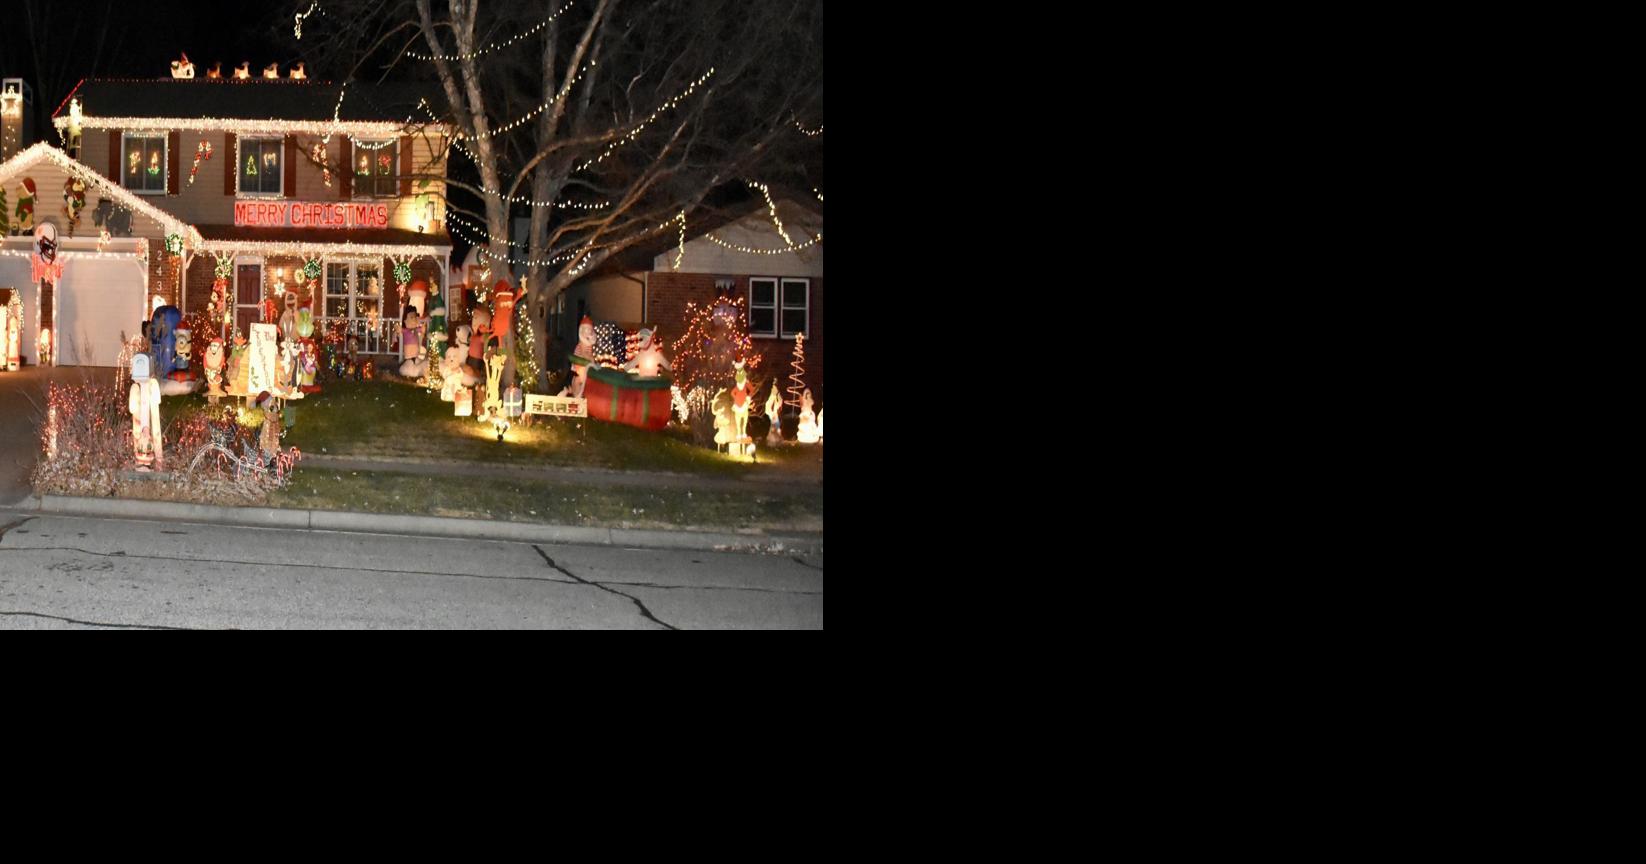 Check out these holiday lights displays in Lincoln